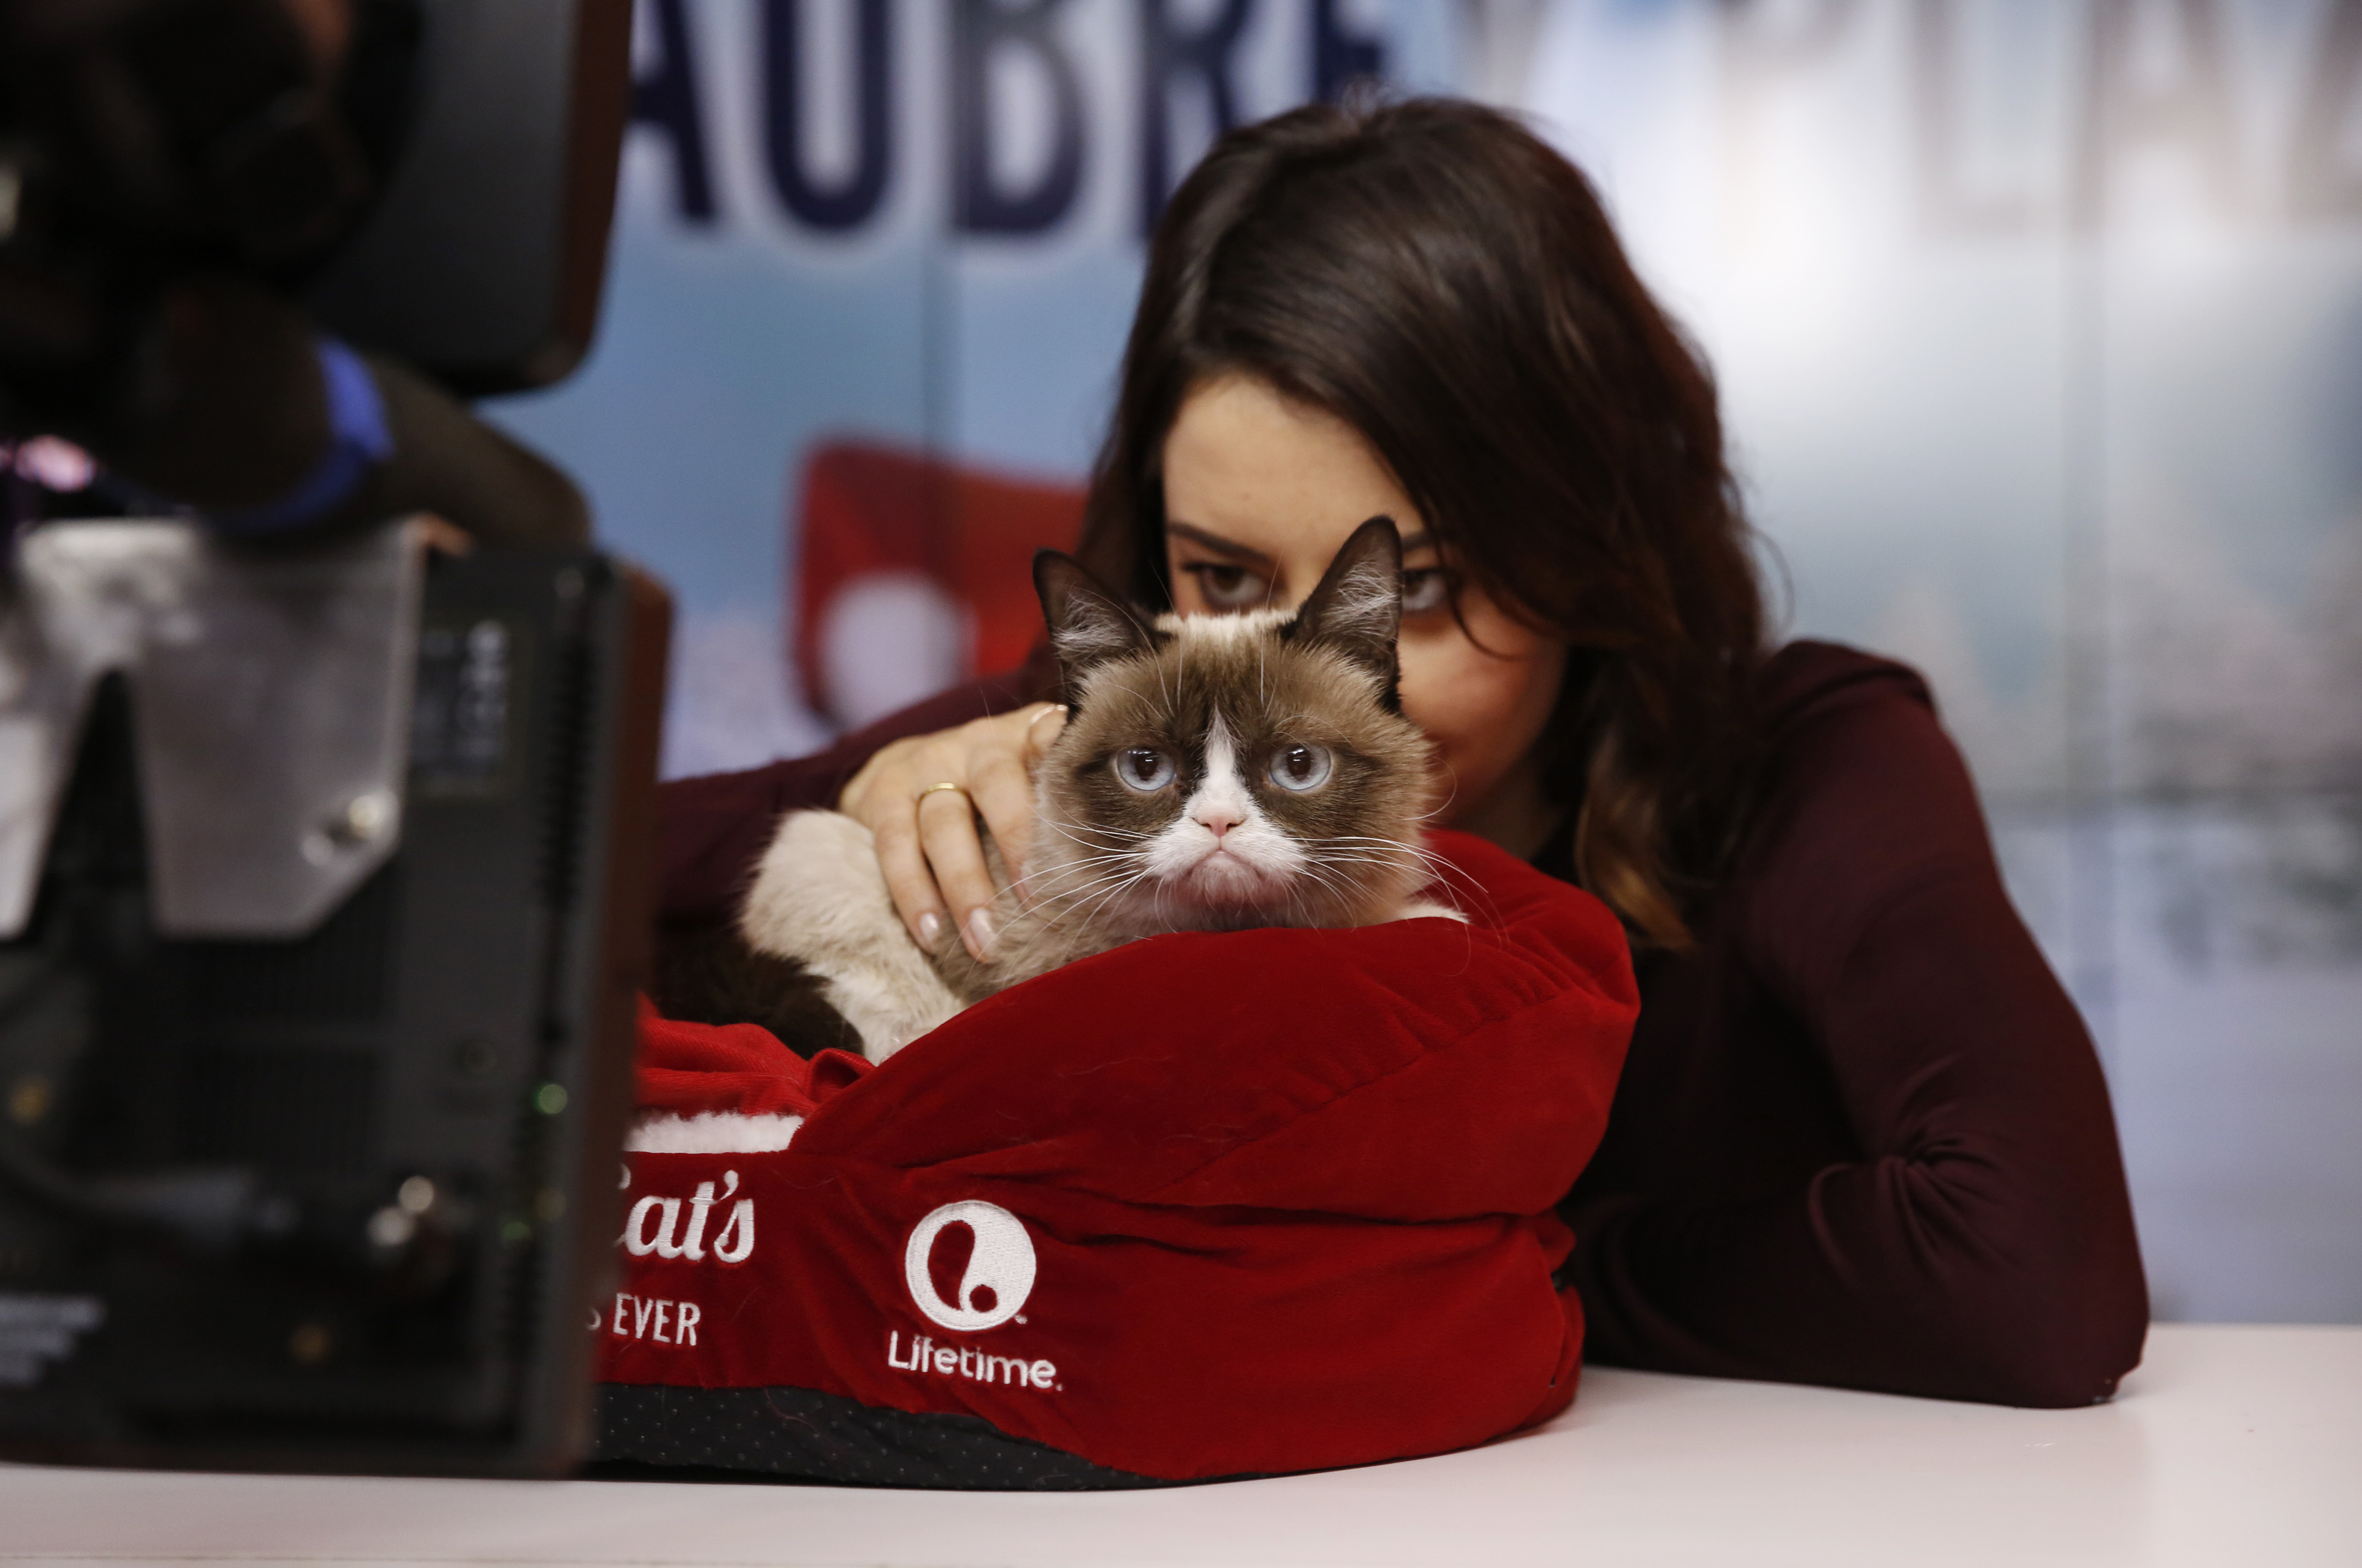 Aubrey Plaza and Grumpy Cat appear on NBC News' "Today" show on Nov. 24, 2014. (NBC NewsWire—NBCU Photo Bank via Getty Images)